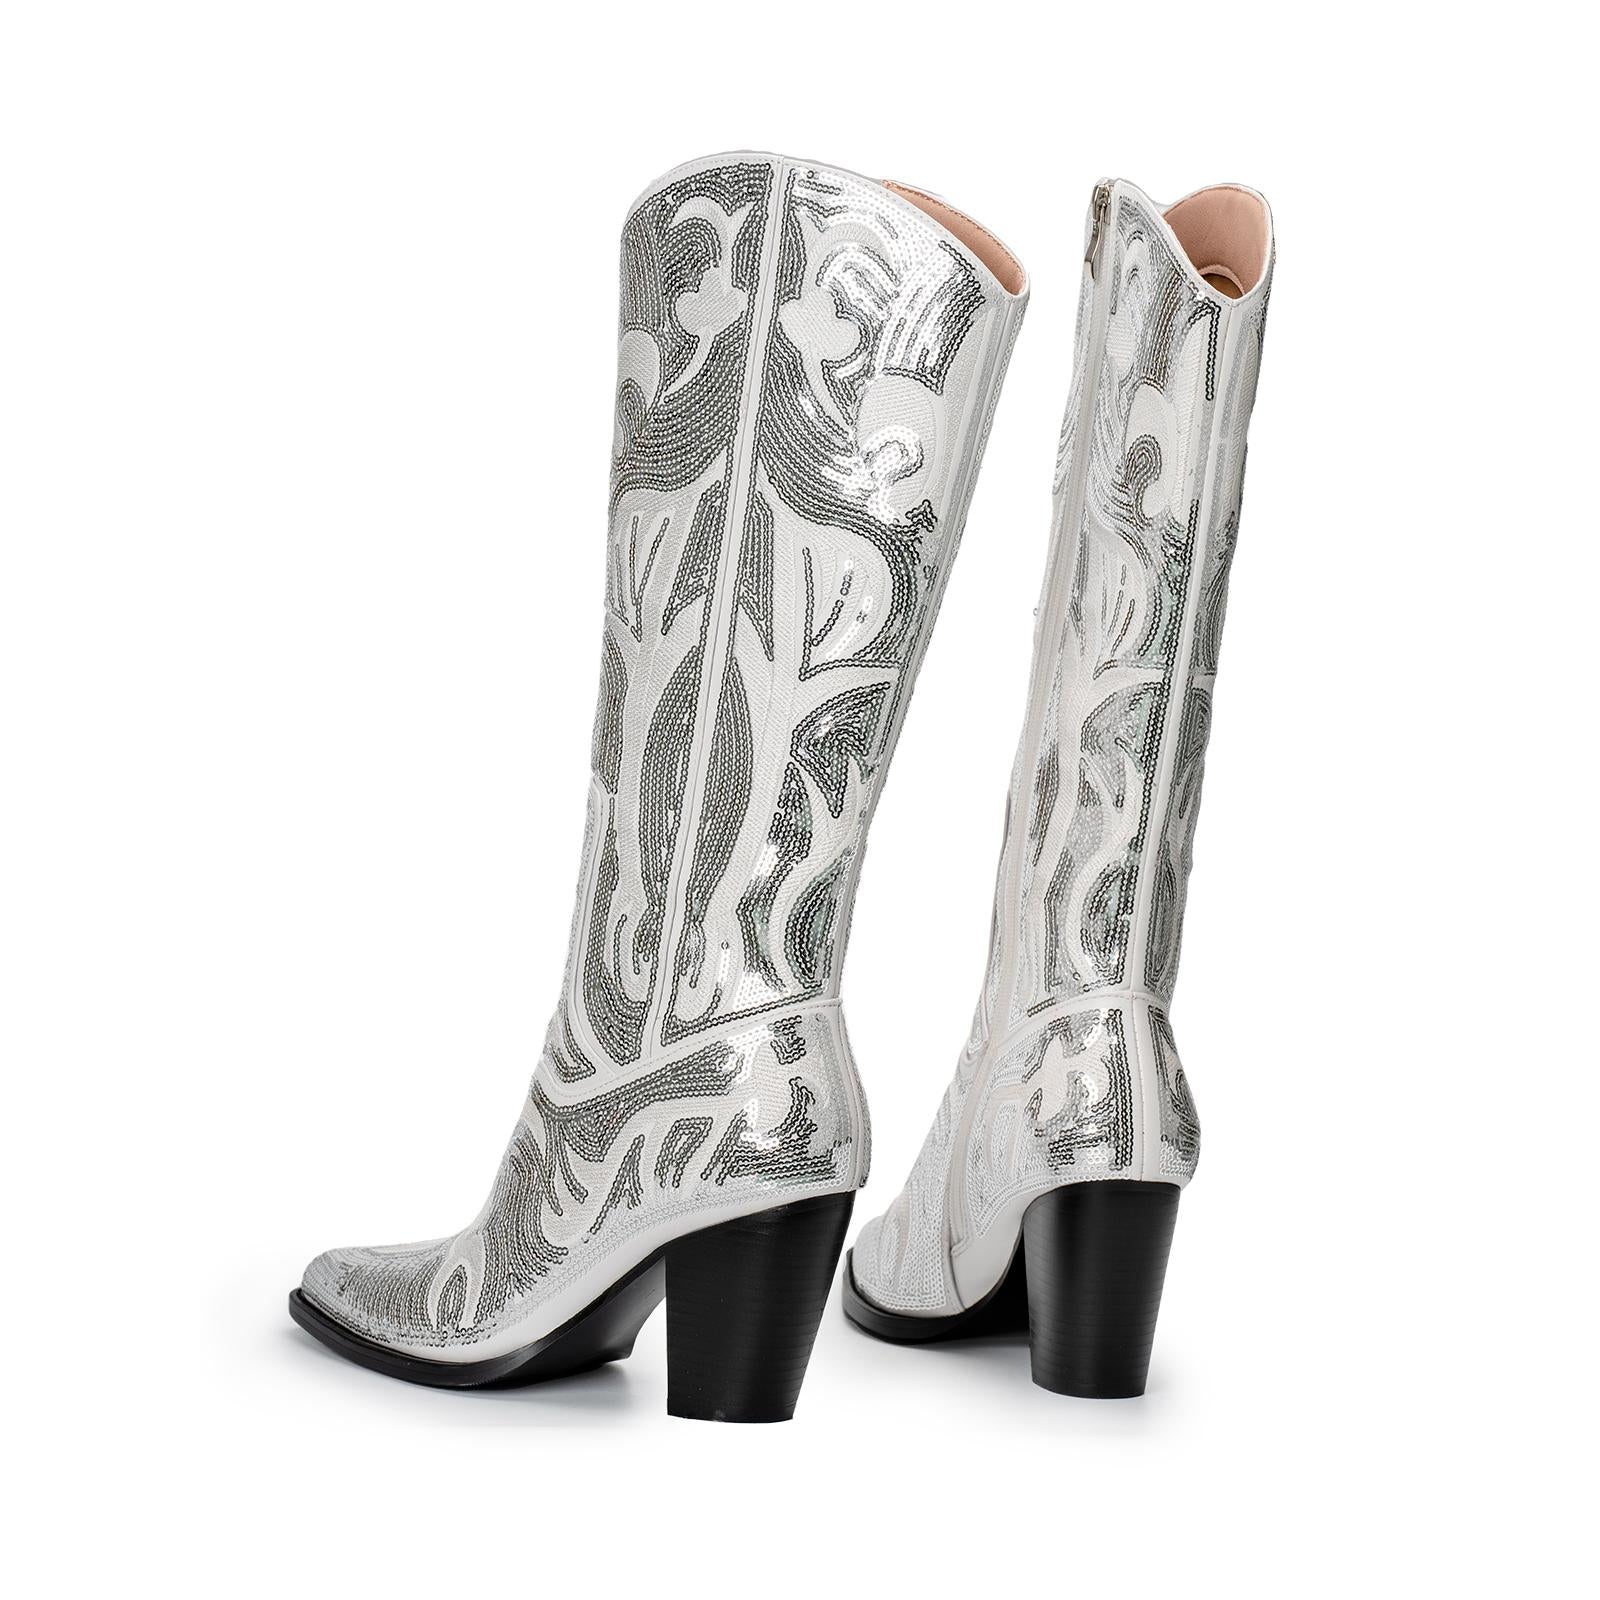 Sequin Pointed Toe Slanted Heel Western Mid Calf Boots